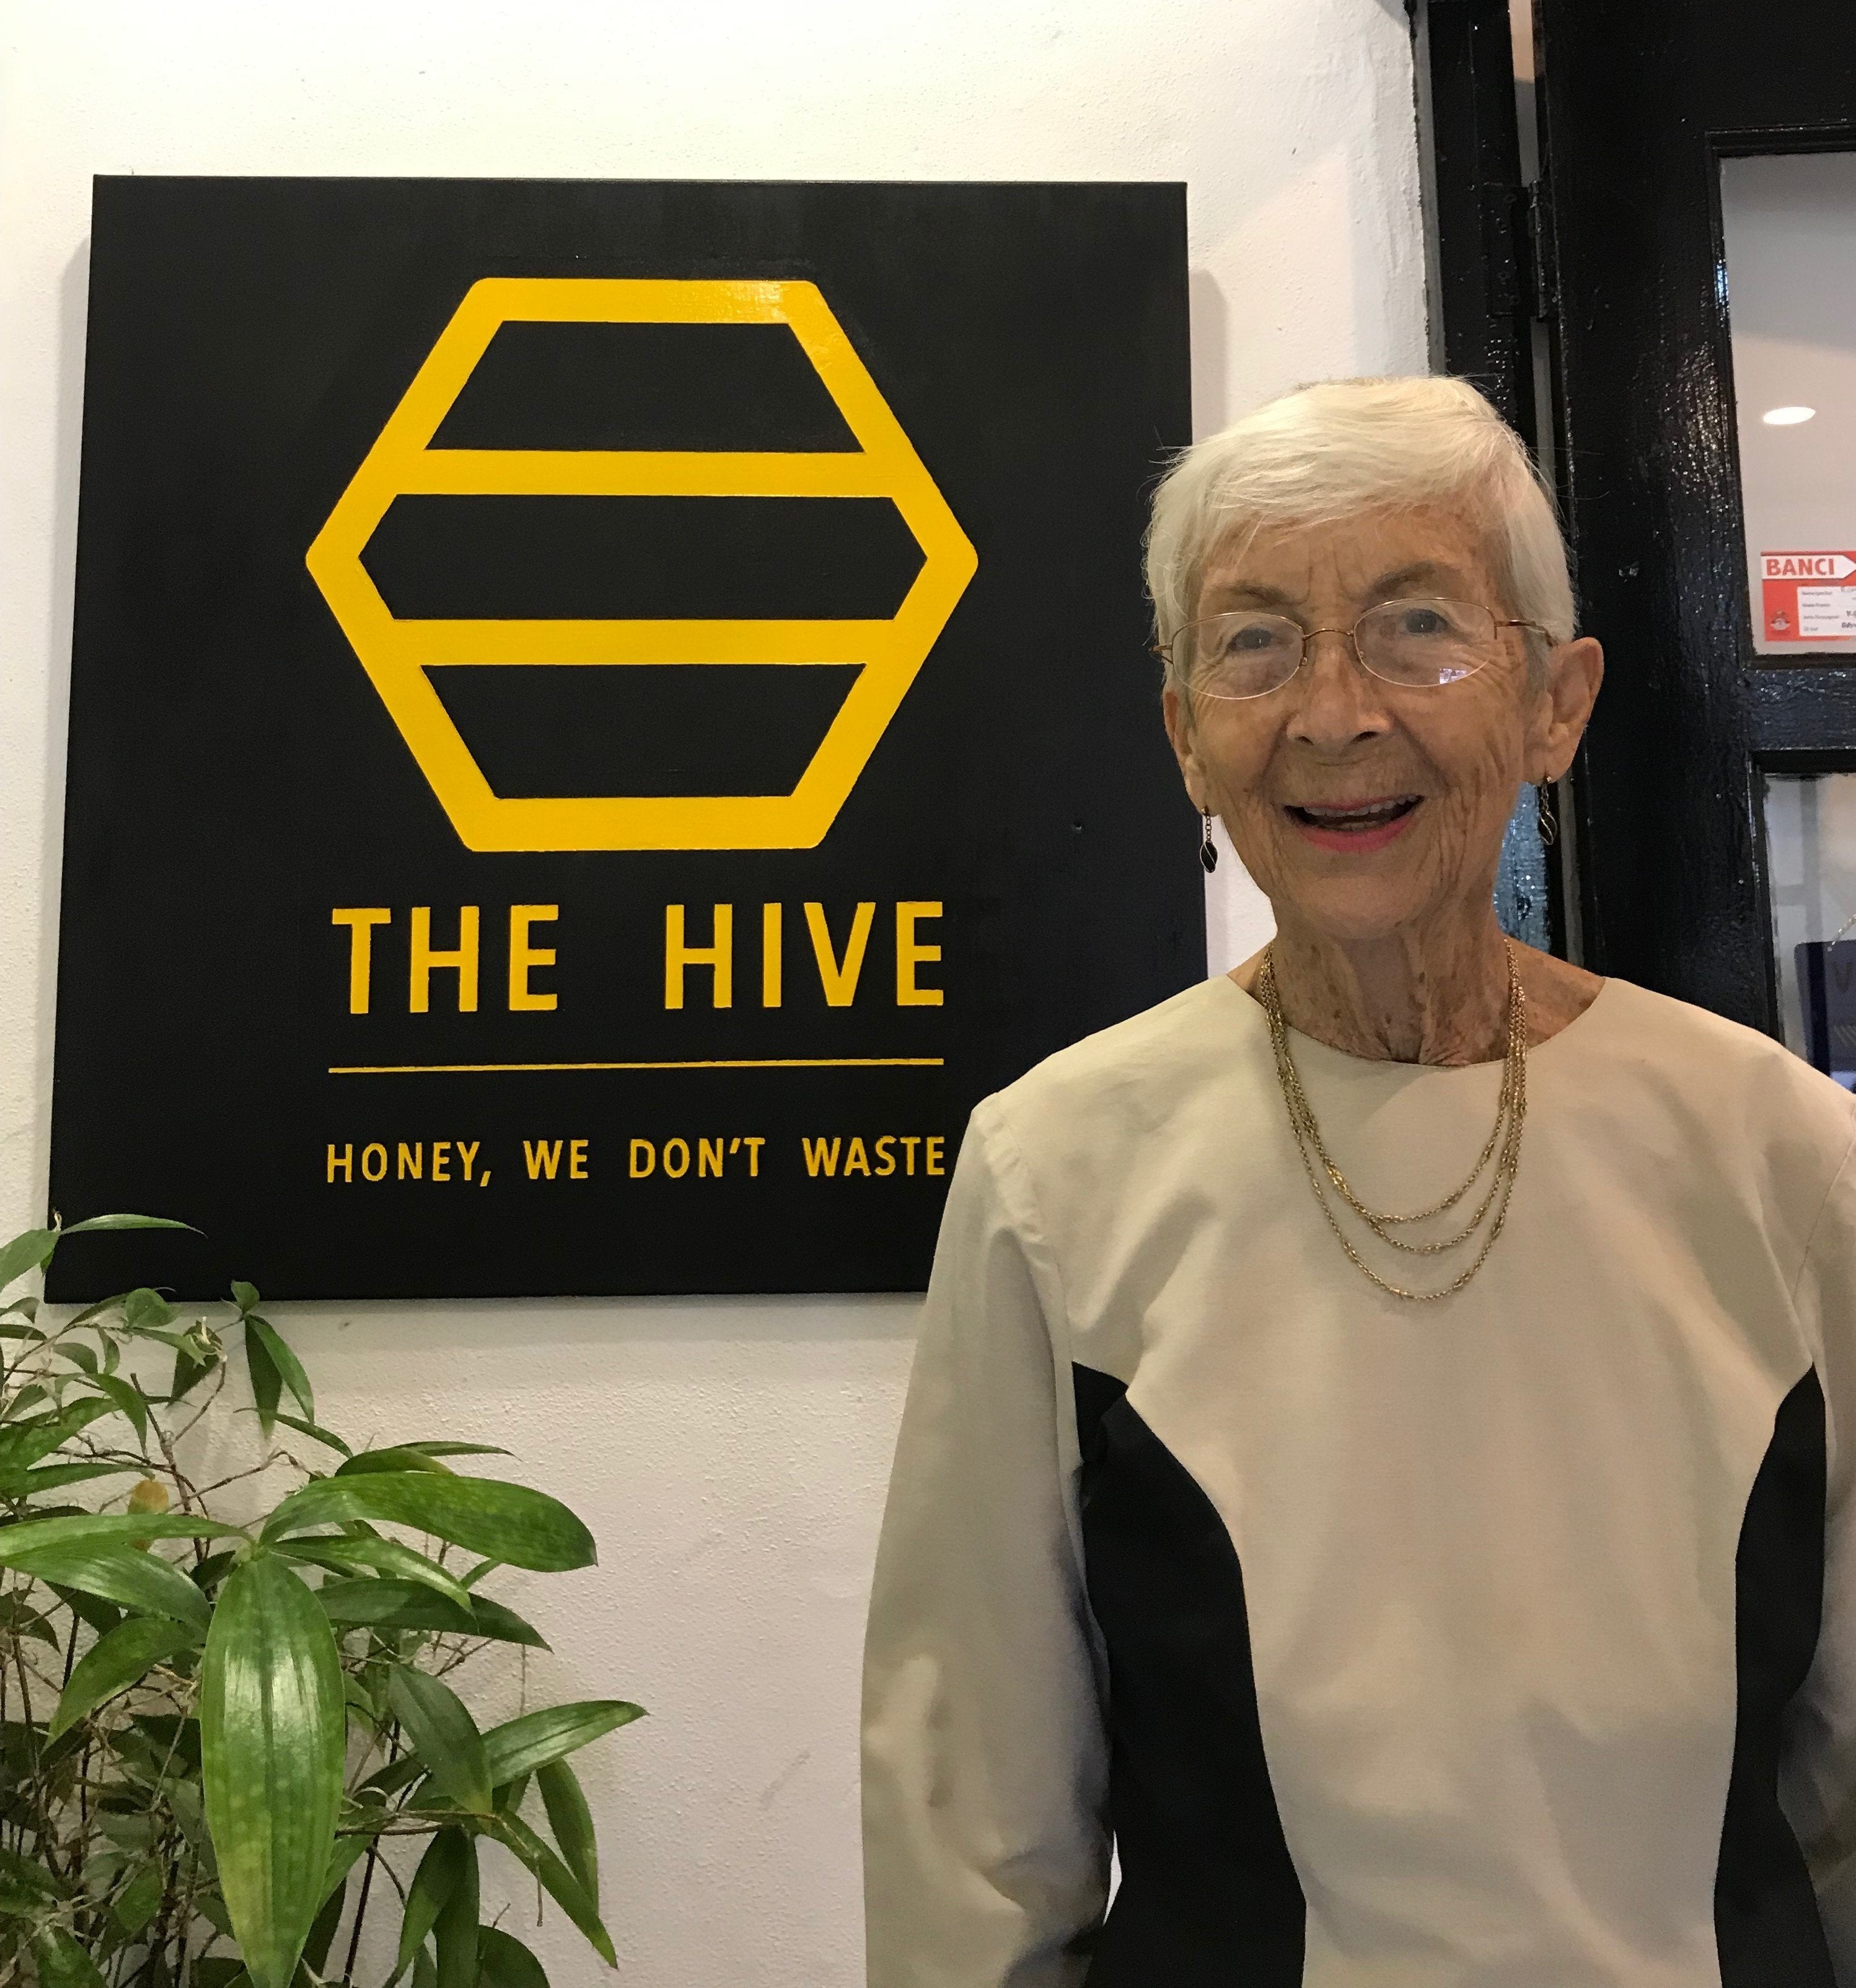 Shop online at the Hive Bulk foods, largest zero waste shop in Malaysia and Singapore.